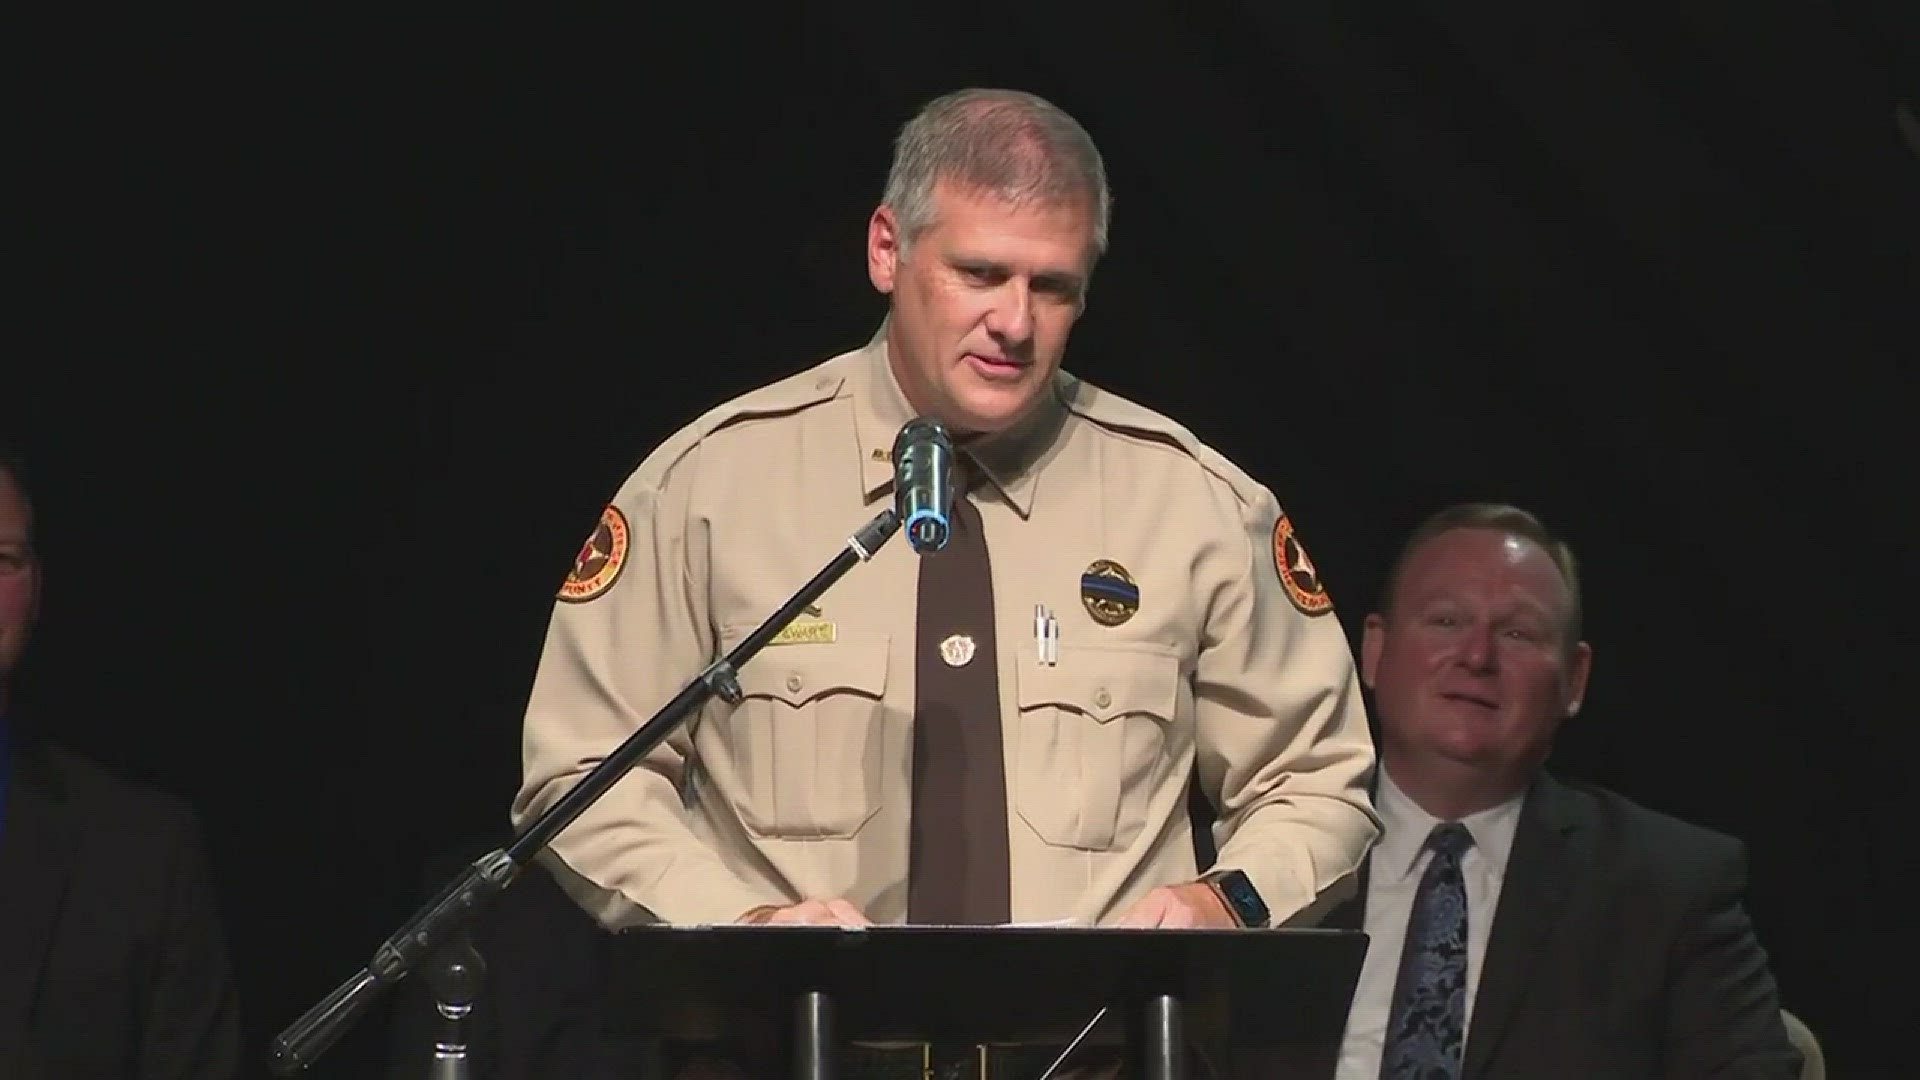 Peach County Sheriff's Office Chaplain Brian Stewart speaking at Sgt. Patrick Sondron's funeral talks to officers about being prepared "for battle."